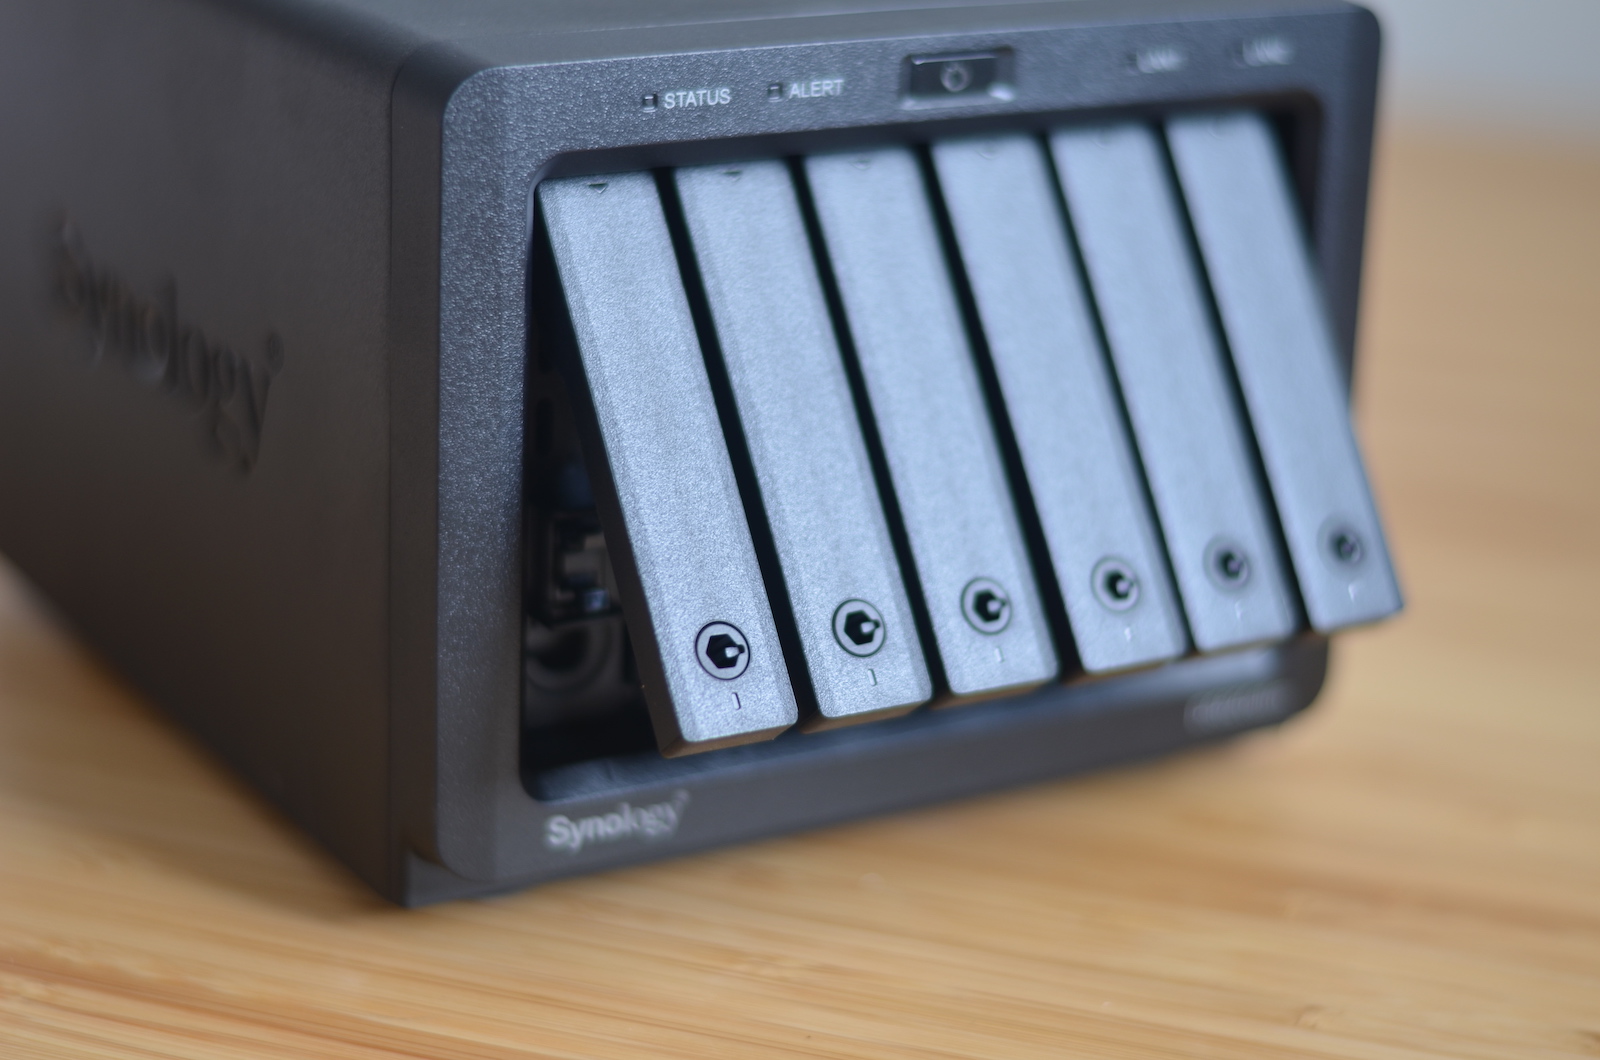 Synology DS620slim review: A tiny NAS unit with up to 24TB of storage